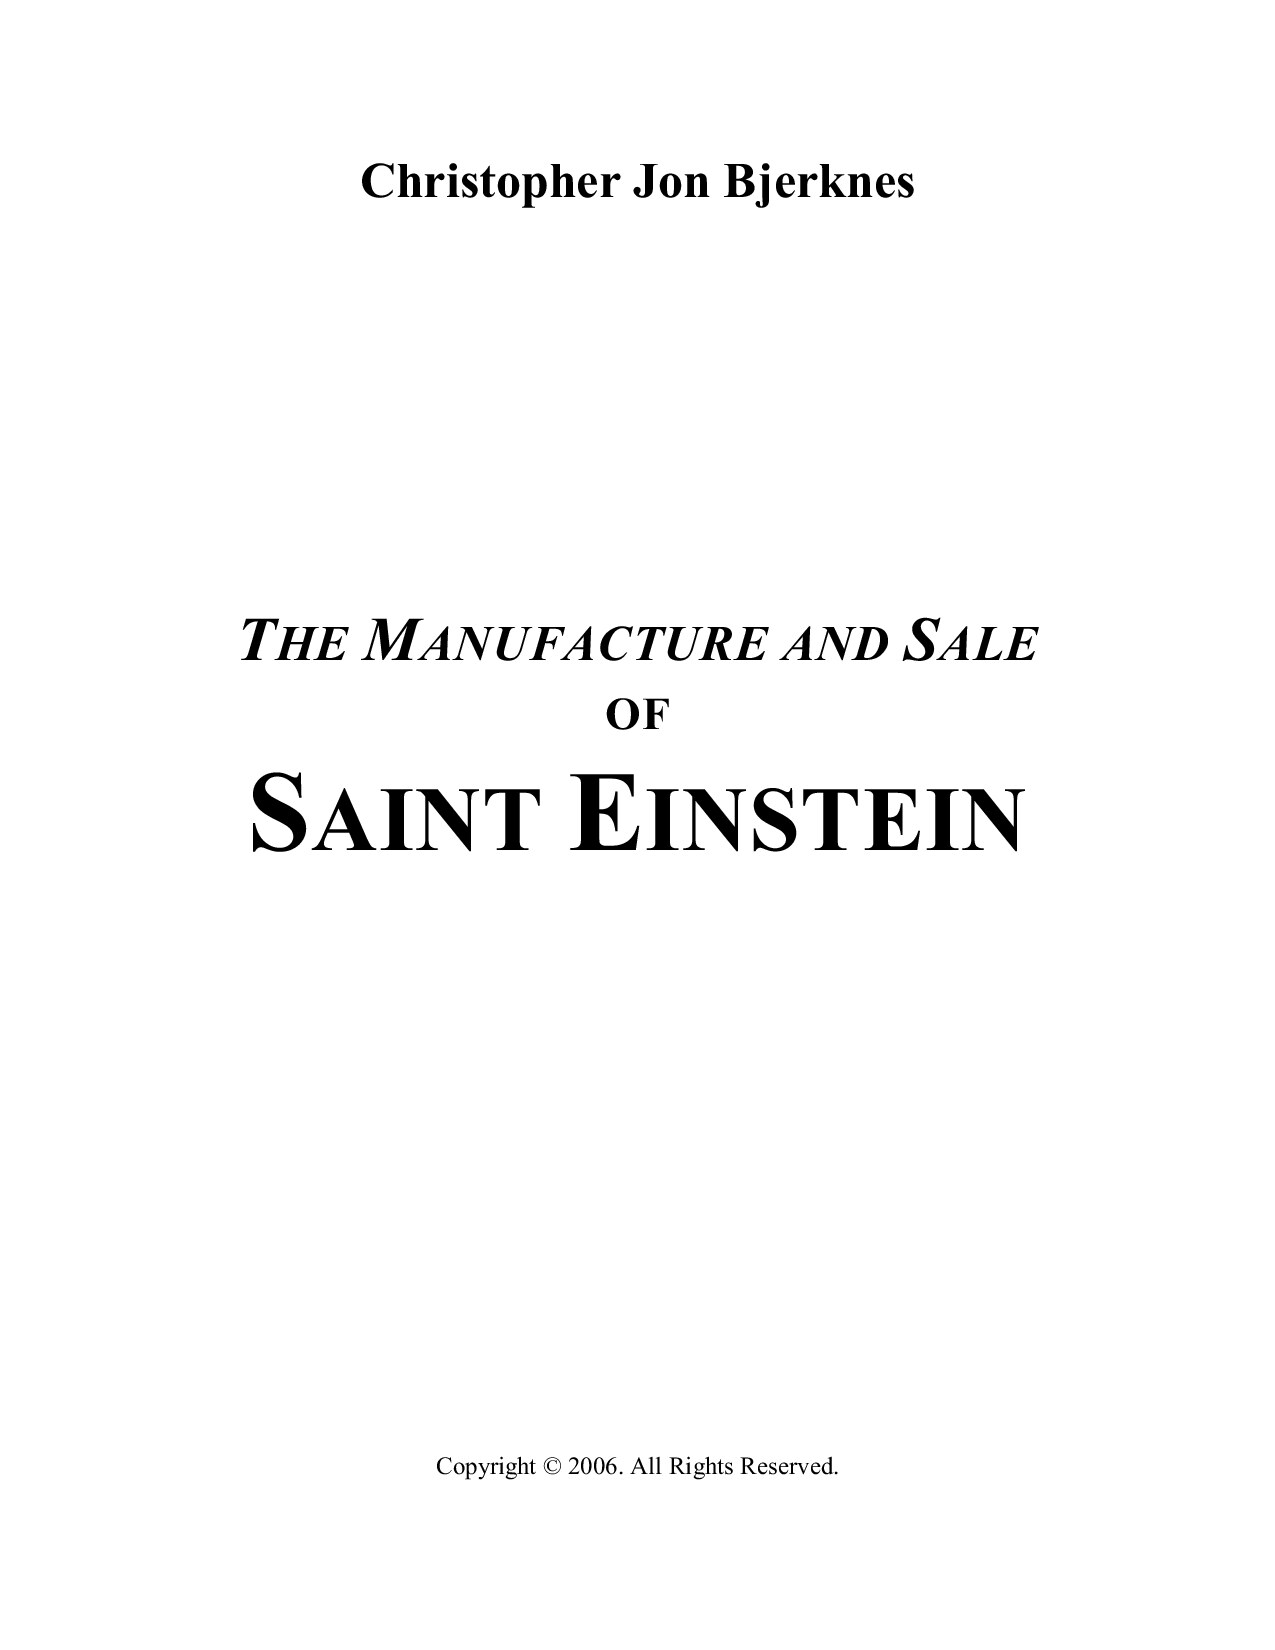 Bjerknes, Christopher John; The Manufacture and Sale of Saint Einstein